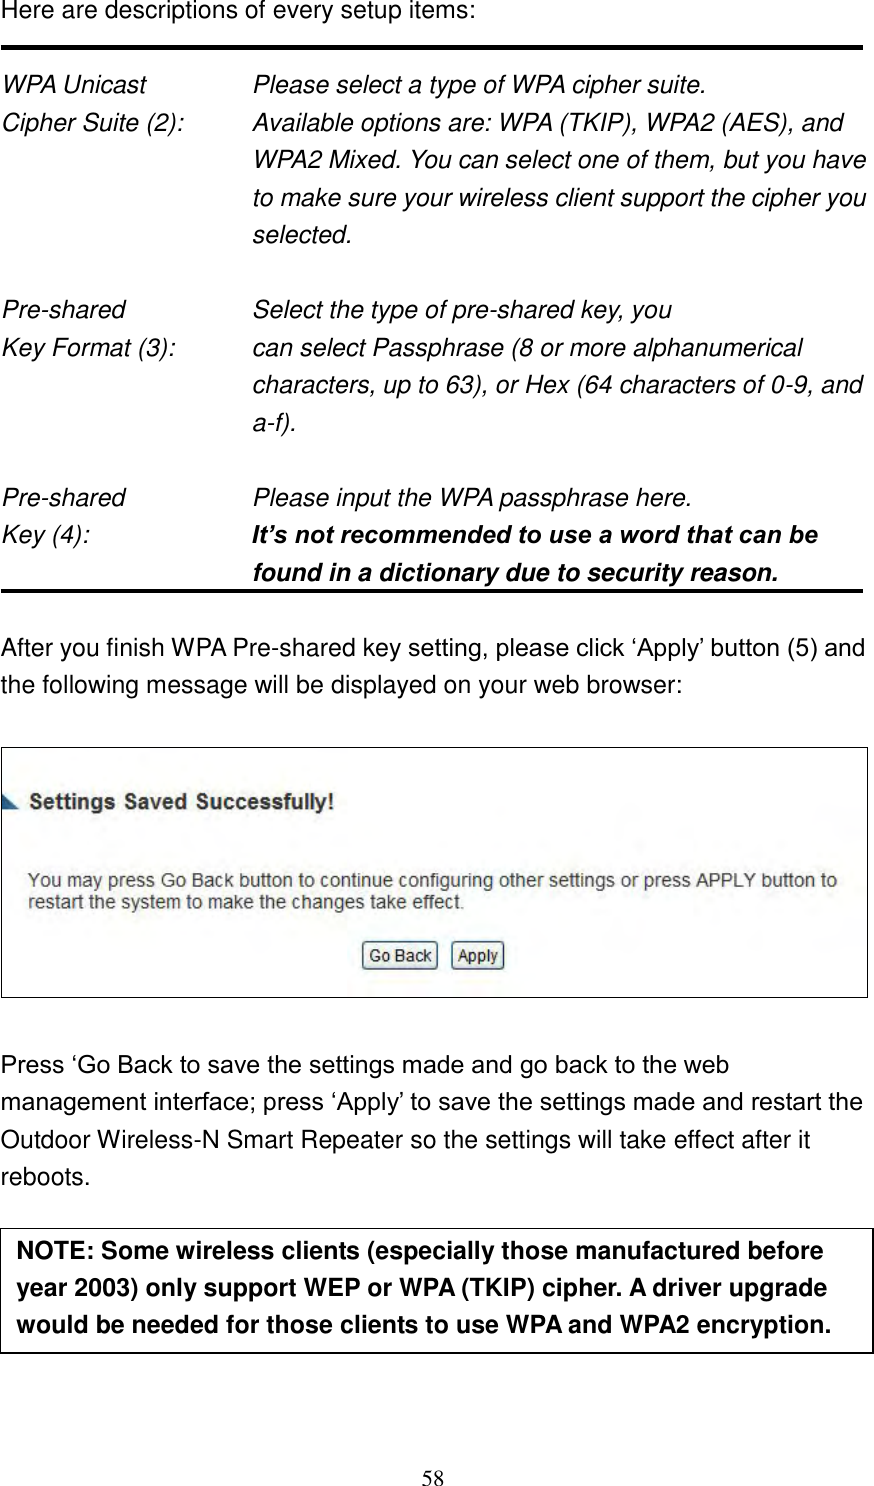 58 Here are descriptions of every setup items:  WPA Unicast      Please select a type of WPA cipher suite. Cipher Suite (2):  Available options are: WPA (TKIP), WPA2 (AES), and WPA2 Mixed. You can select one of them, but you have to make sure your wireless client support the cipher you selected.  Pre-shared        Select the type of pre-shared key, you Key Format (3):    can select Passphrase (8 or more alphanumerical characters, up to 63), or Hex (64 characters of 0-9, and a-f).  Pre-shared        Please input the WPA passphrase here. Key (4):    It’s not recommended to use a word that can be found in a dictionary due to security reason.  After you finish WPA Pre-shared key setting, please click „Apply‟ button (5) and the following message will be displayed on your web browser:    Press „Go Back to save the settings made and go back to the web management interface; press „Apply‟ to save the settings made and restart the Outdoor Wireless-N Smart Repeater so the settings will take effect after it reboots.       NOTE: Some wireless clients (especially those manufactured before year 2003) only support WEP or WPA (TKIP) cipher. A driver upgrade would be needed for those clients to use WPA and WPA2 encryption. 